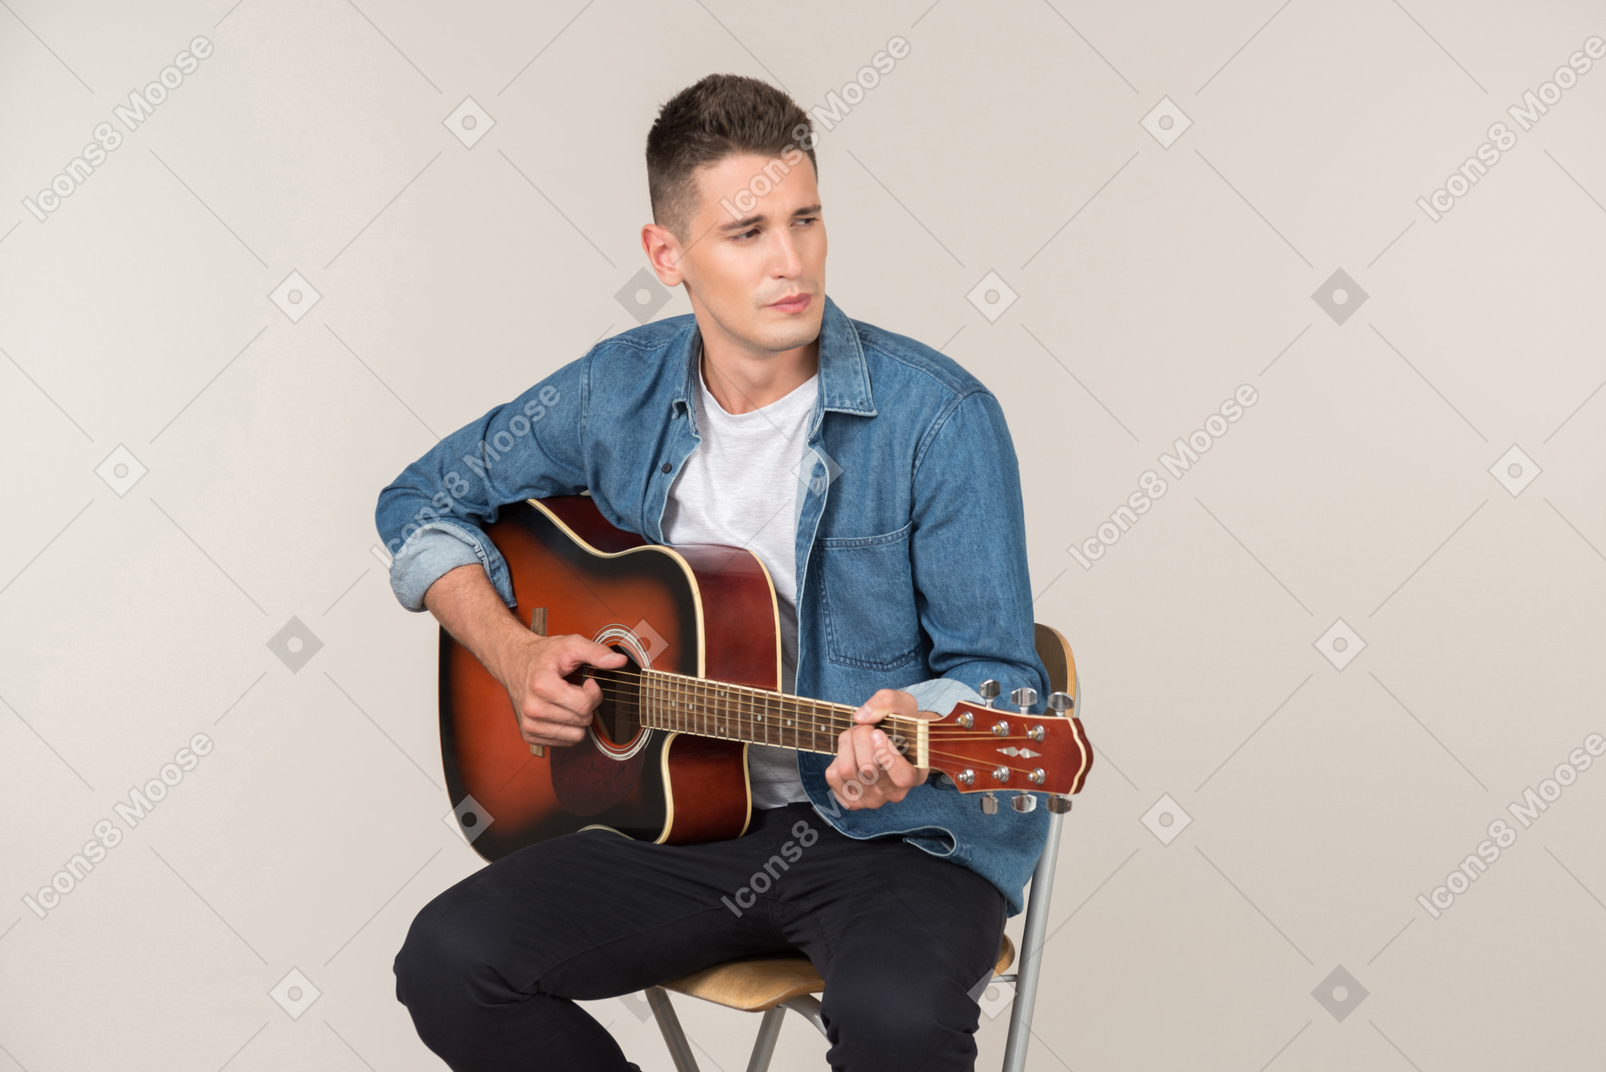 Young stand-up comic playing on guitar and looking aside